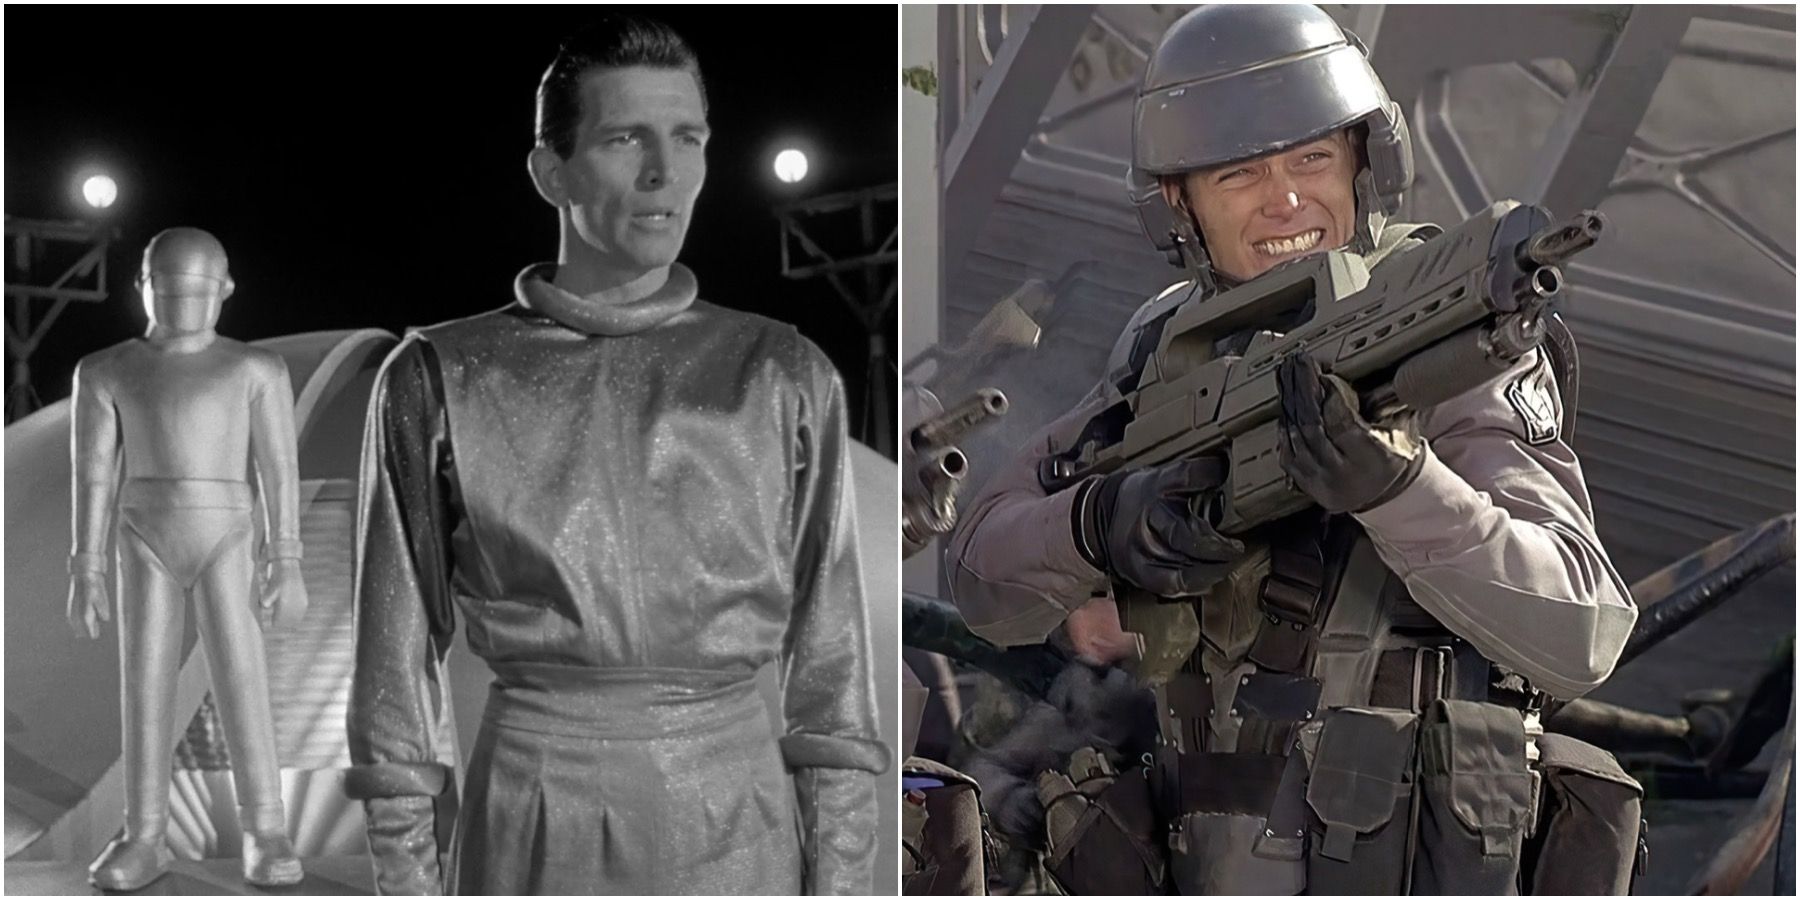 starship troopers day the earth stood still split image 